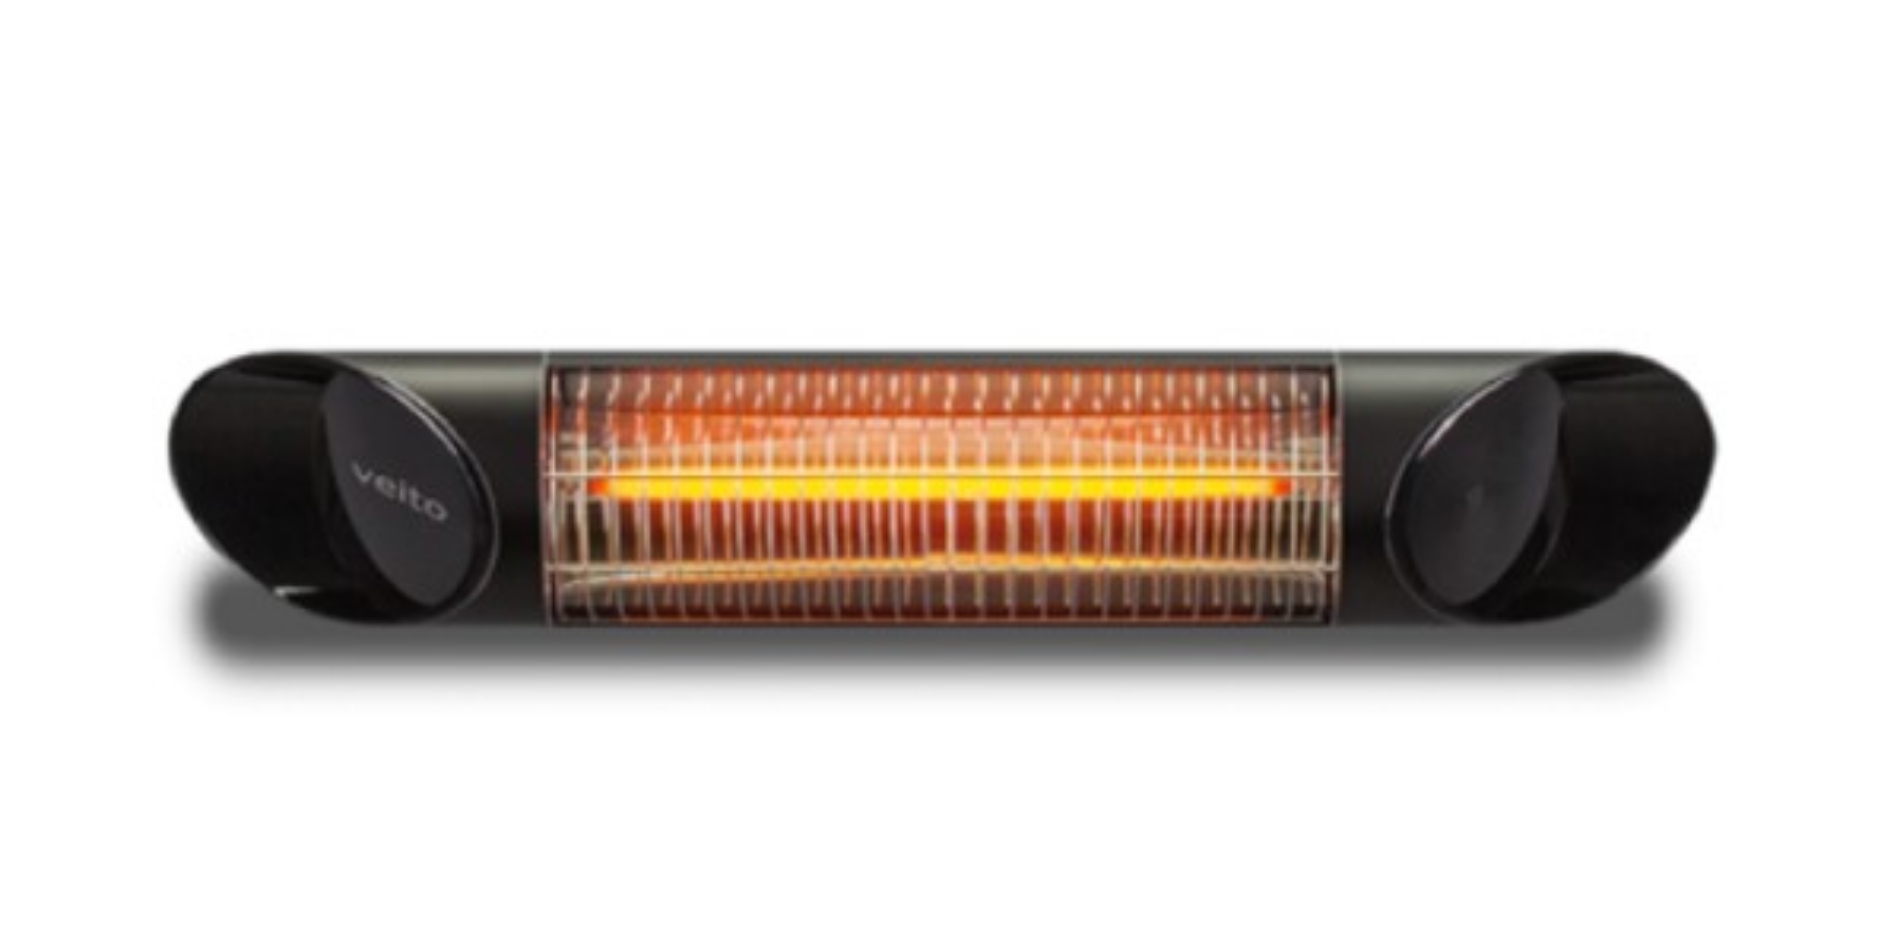 Infrared Electric Radiant Head Heater 1.2Kw